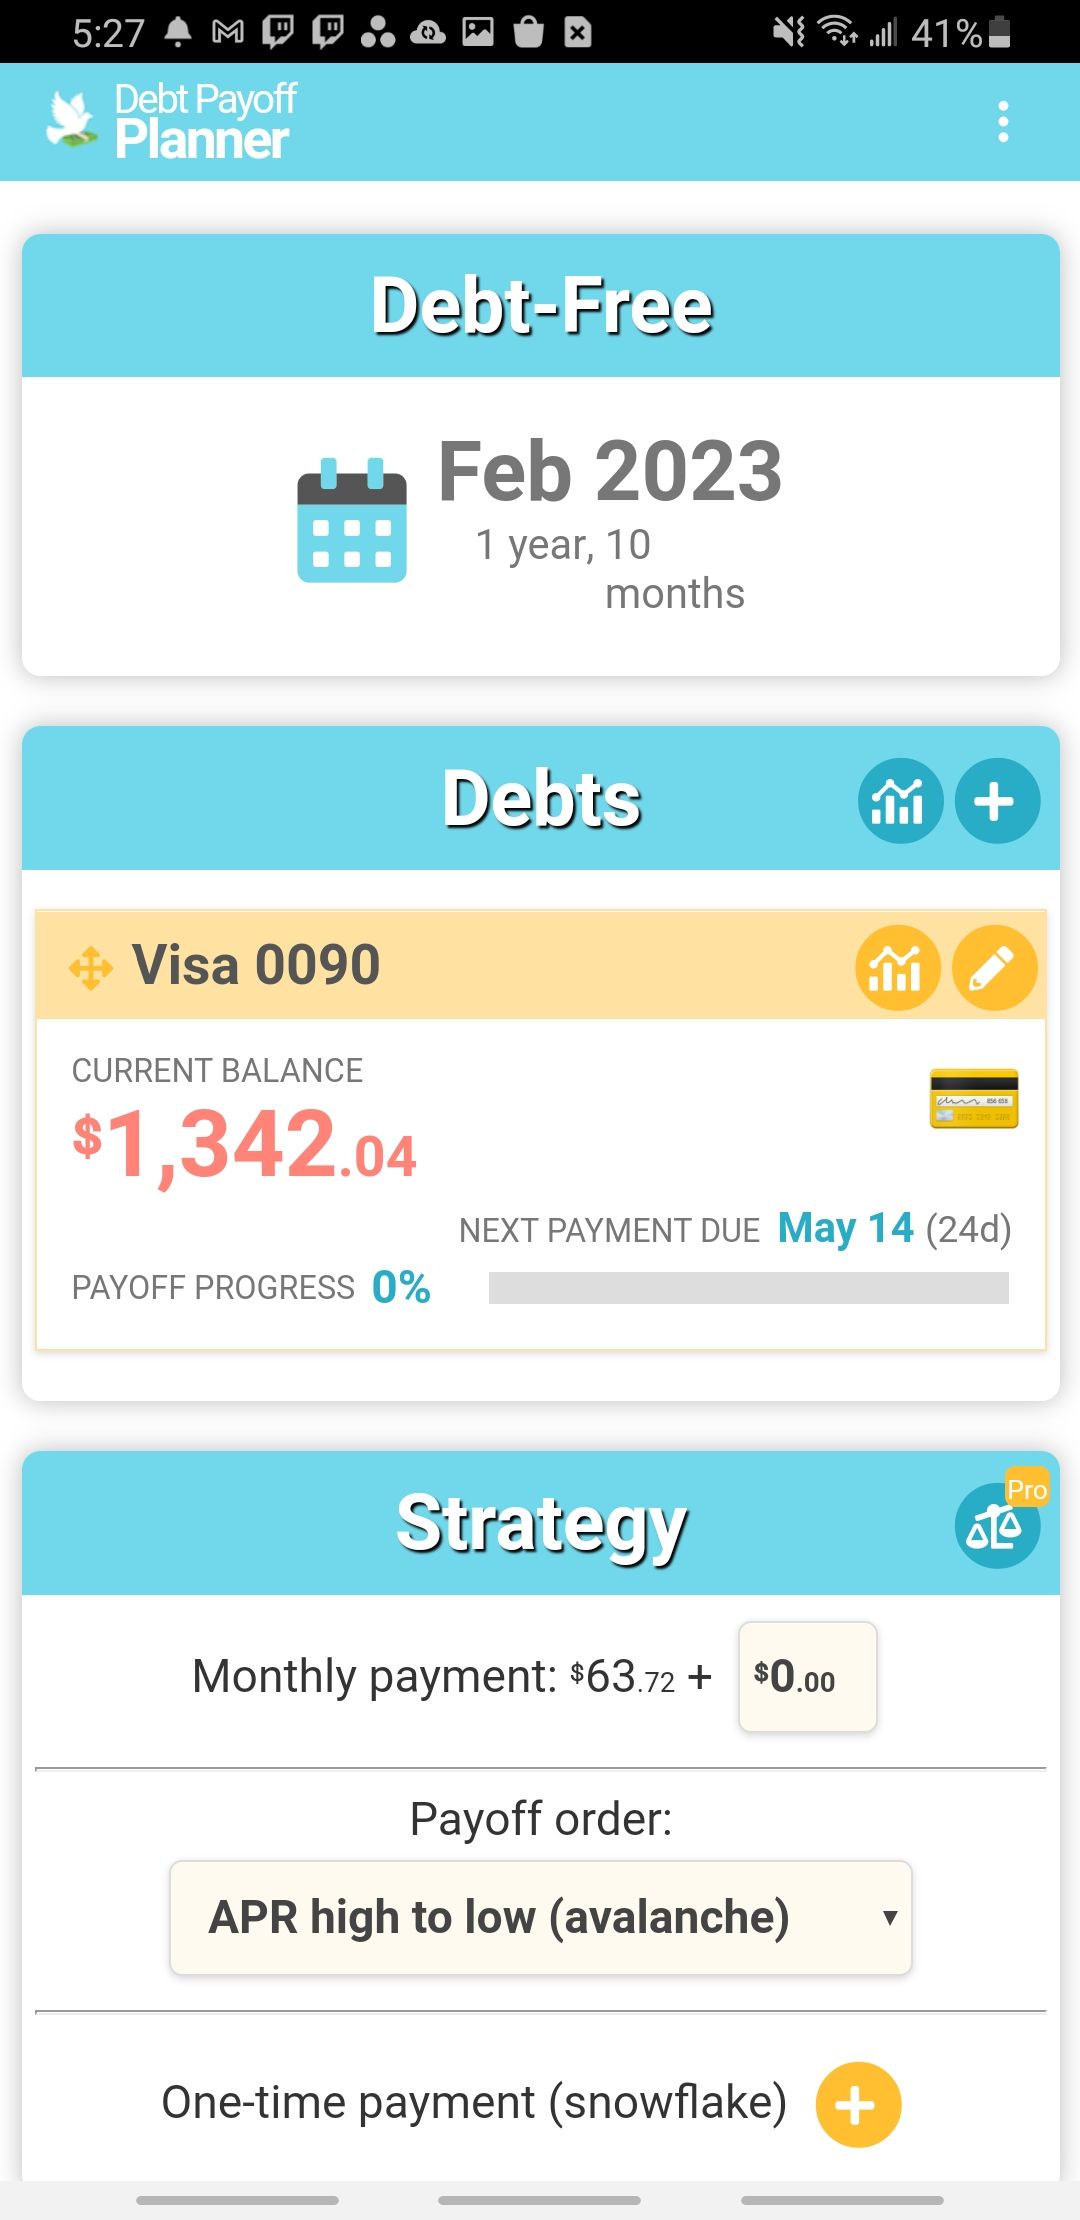 debt payoff planner app home screen